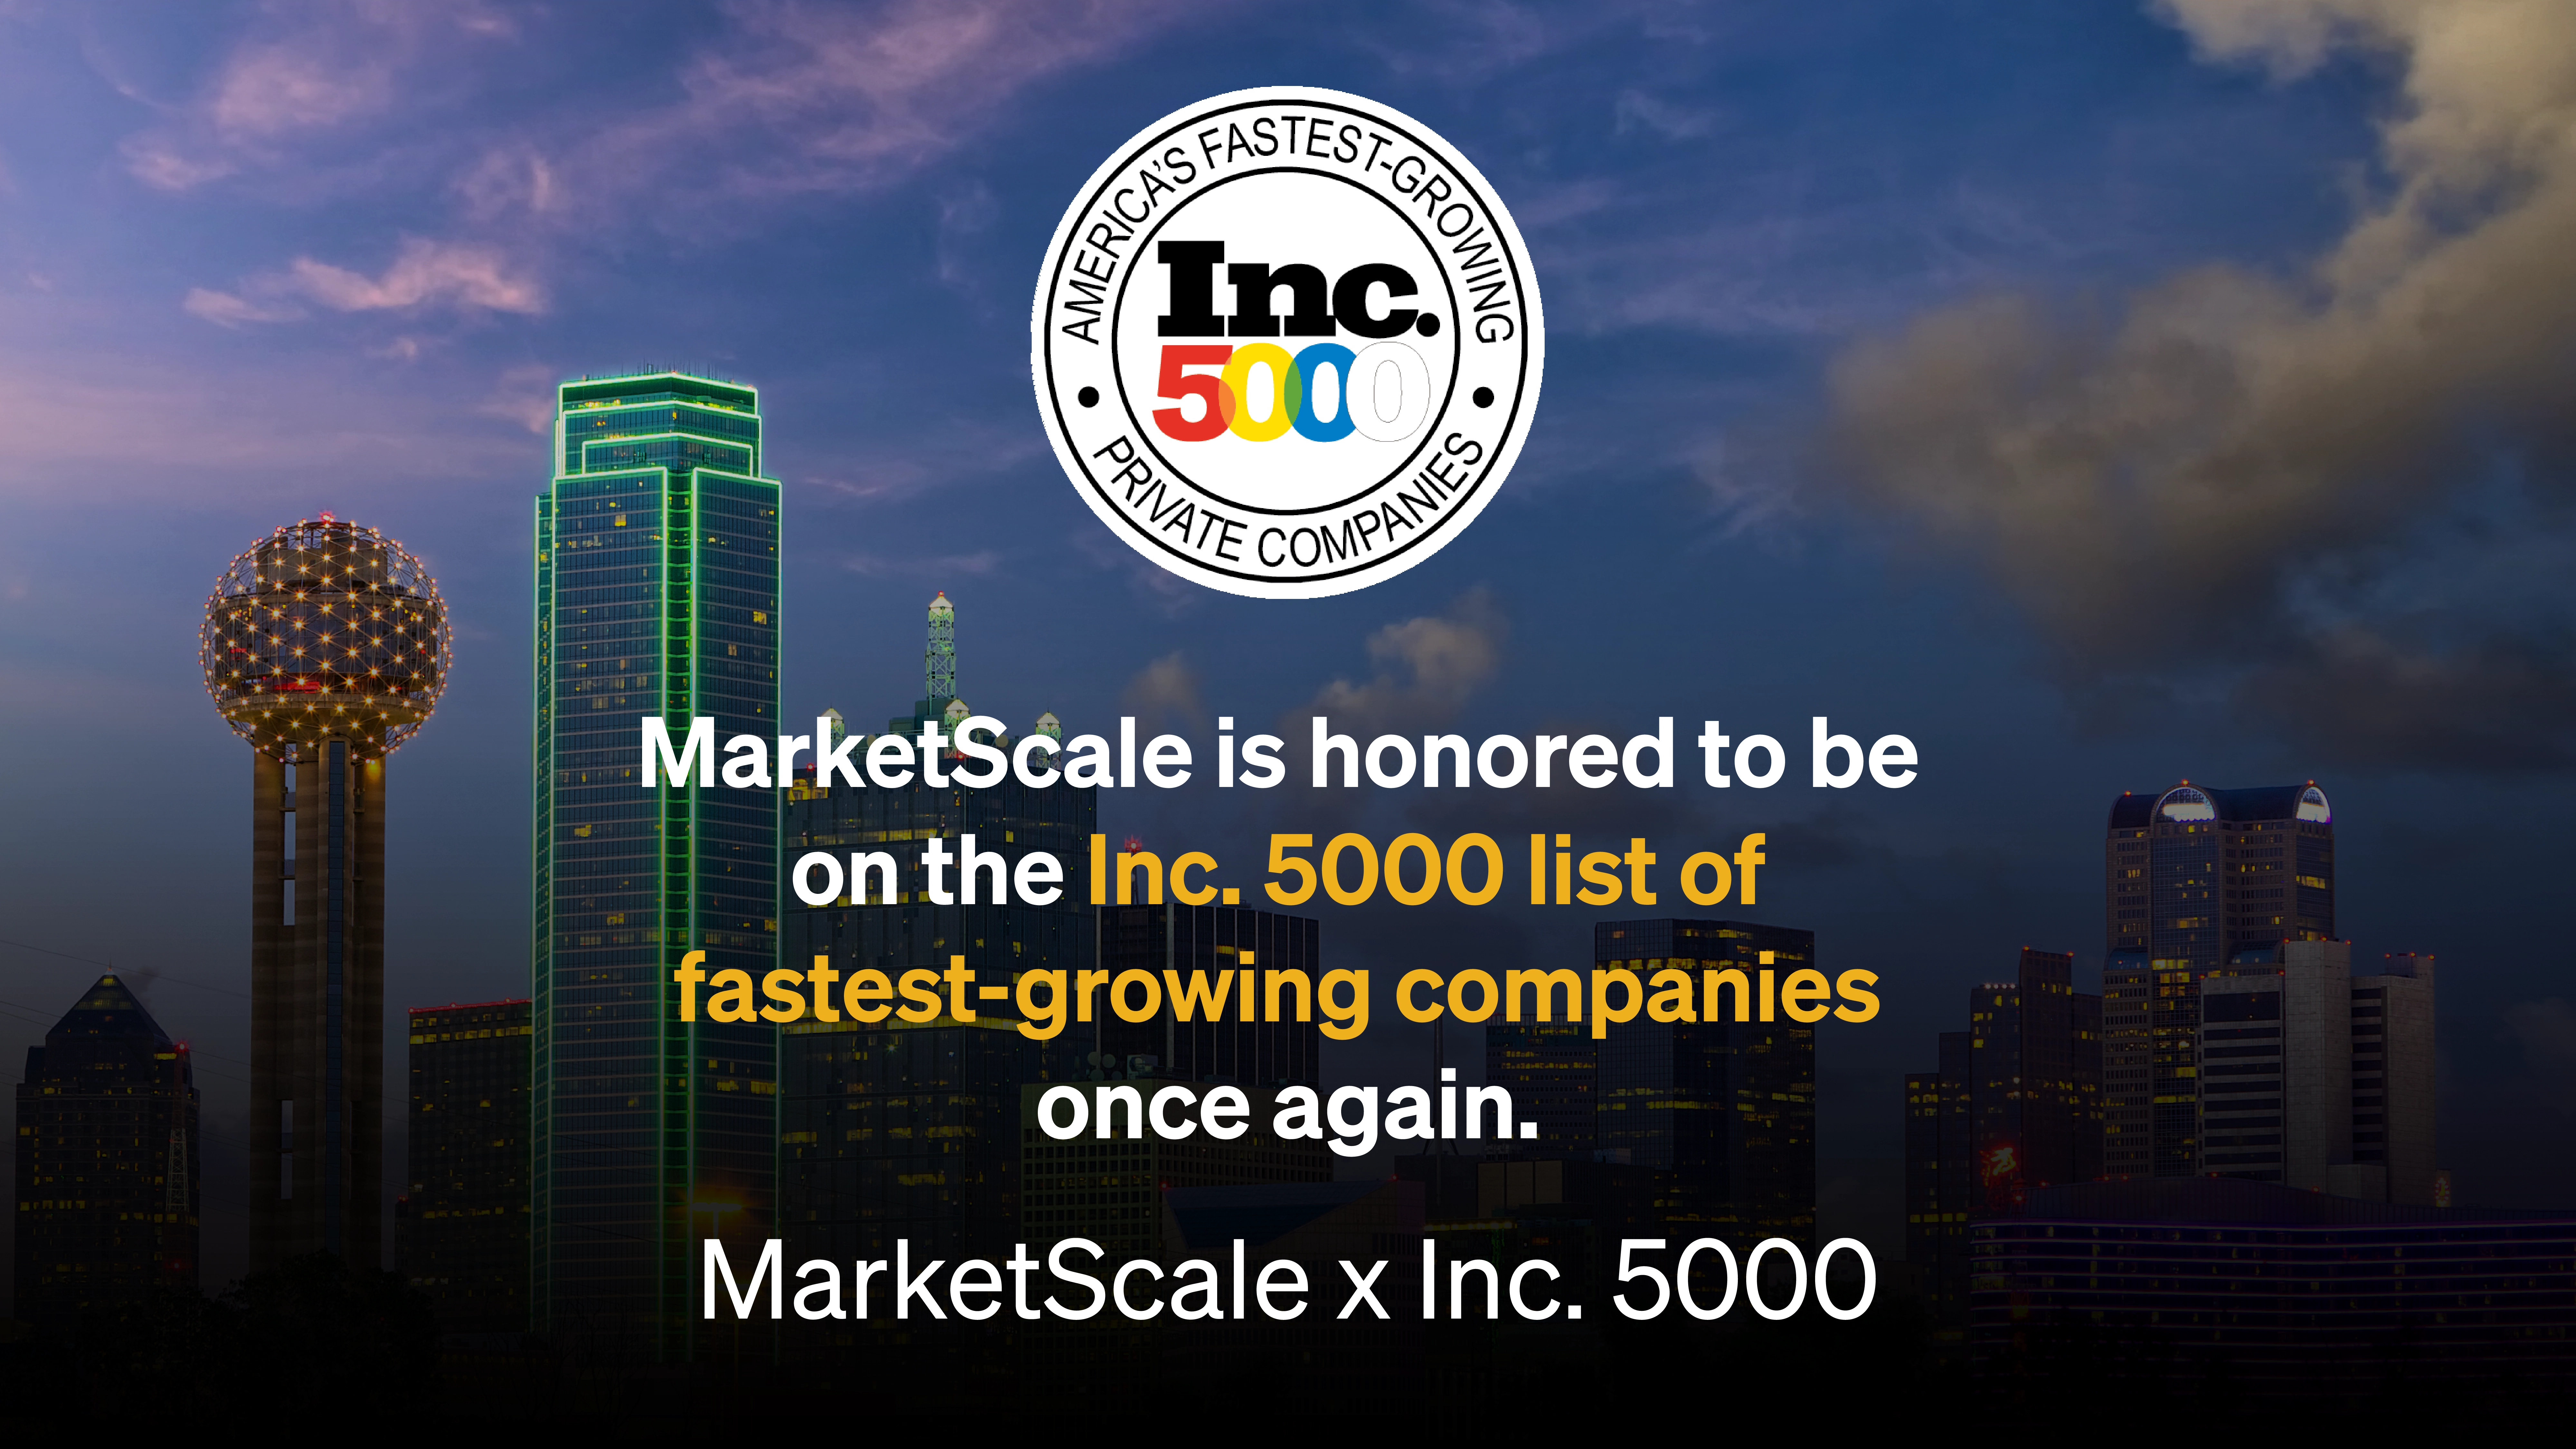 MarketScale Proudly Announces Our Inclusion in the Inc. 5000 List of Fastest-Growing Companies